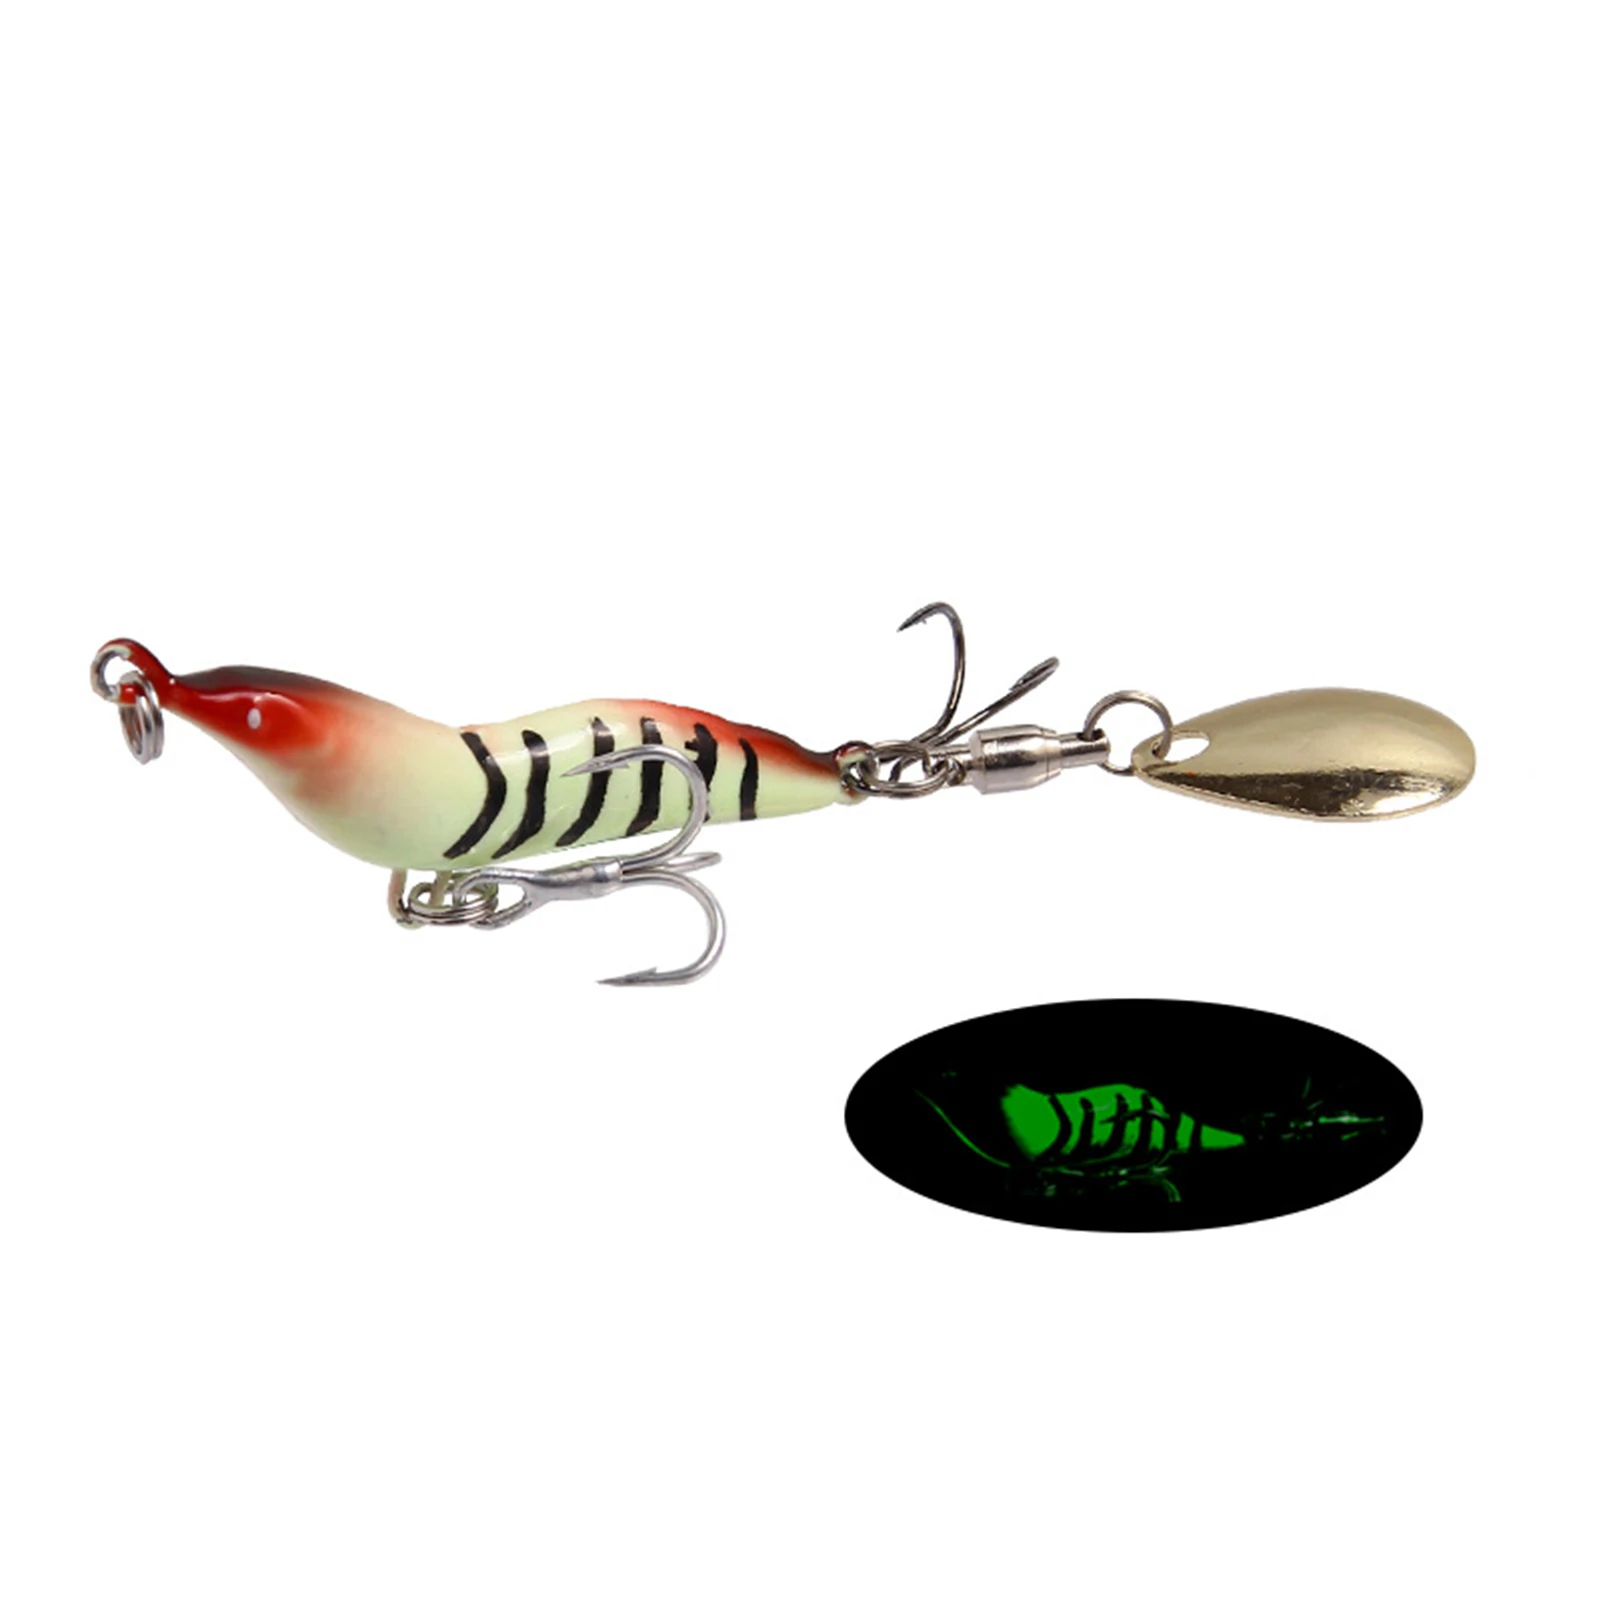 

Fishing Lure Shrimp Fishing Lures Bait Double Hooks Artificial Bait Fishing Tackle For Freshwater Saltwater